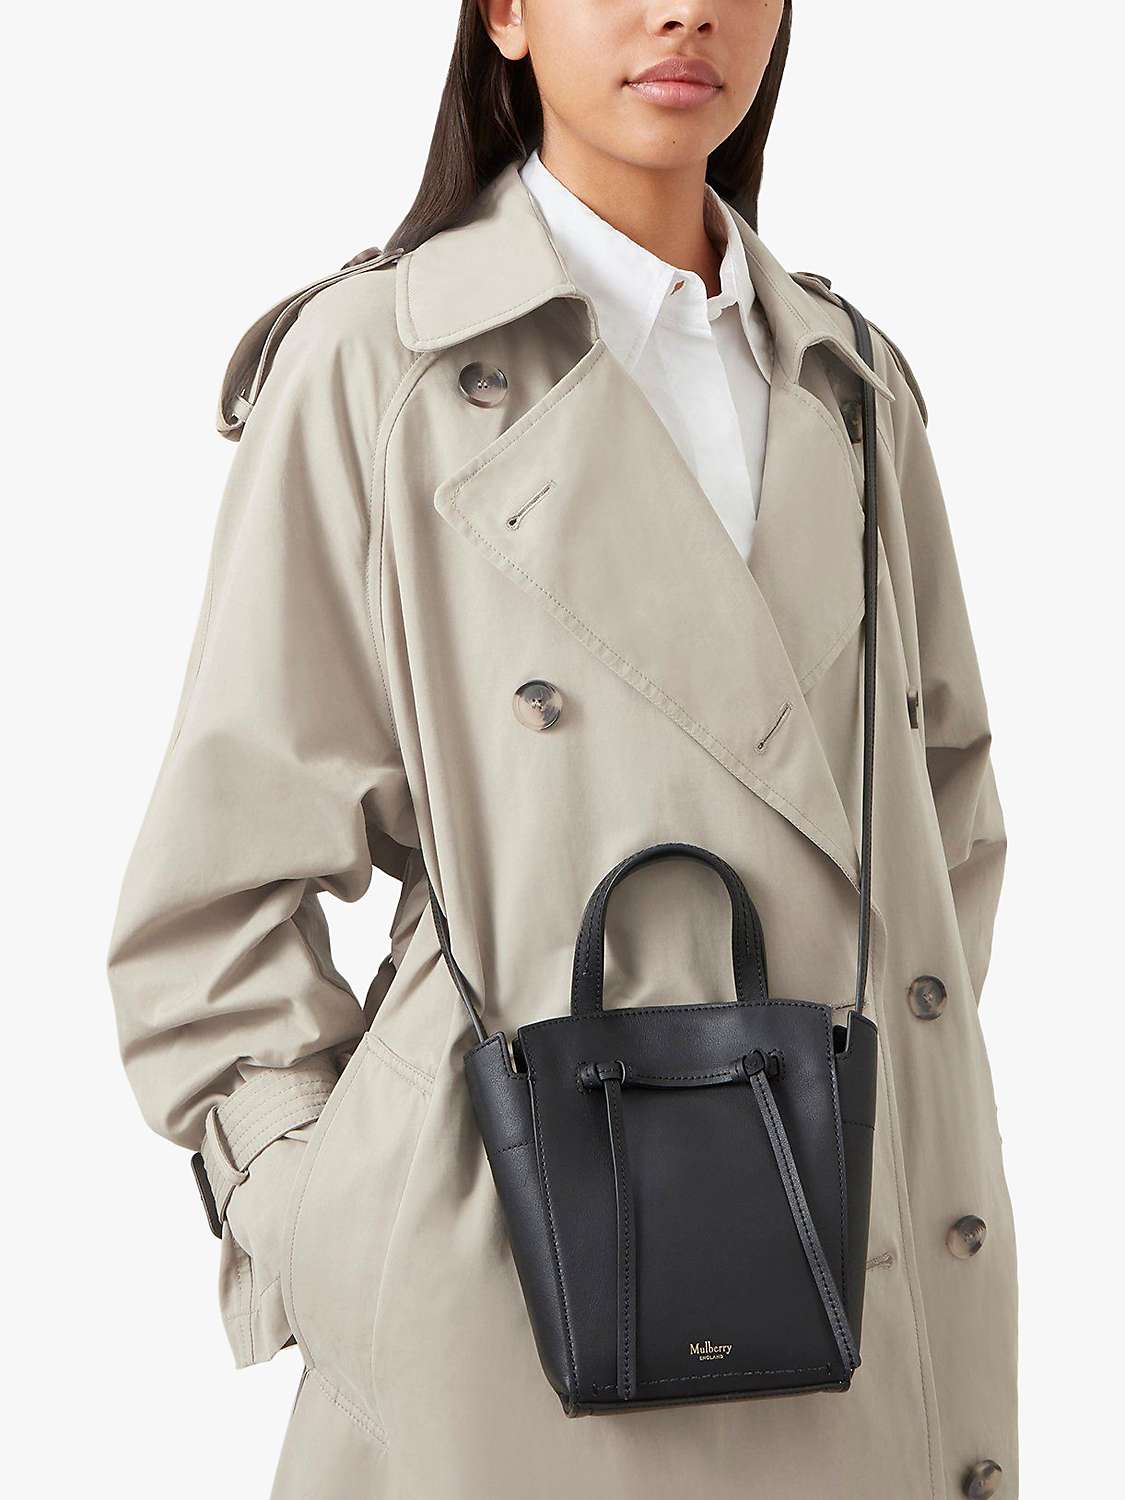 Buy Mulberry Mini Clovelly Refined Flat Calf Tote Bag Online at johnlewis.com